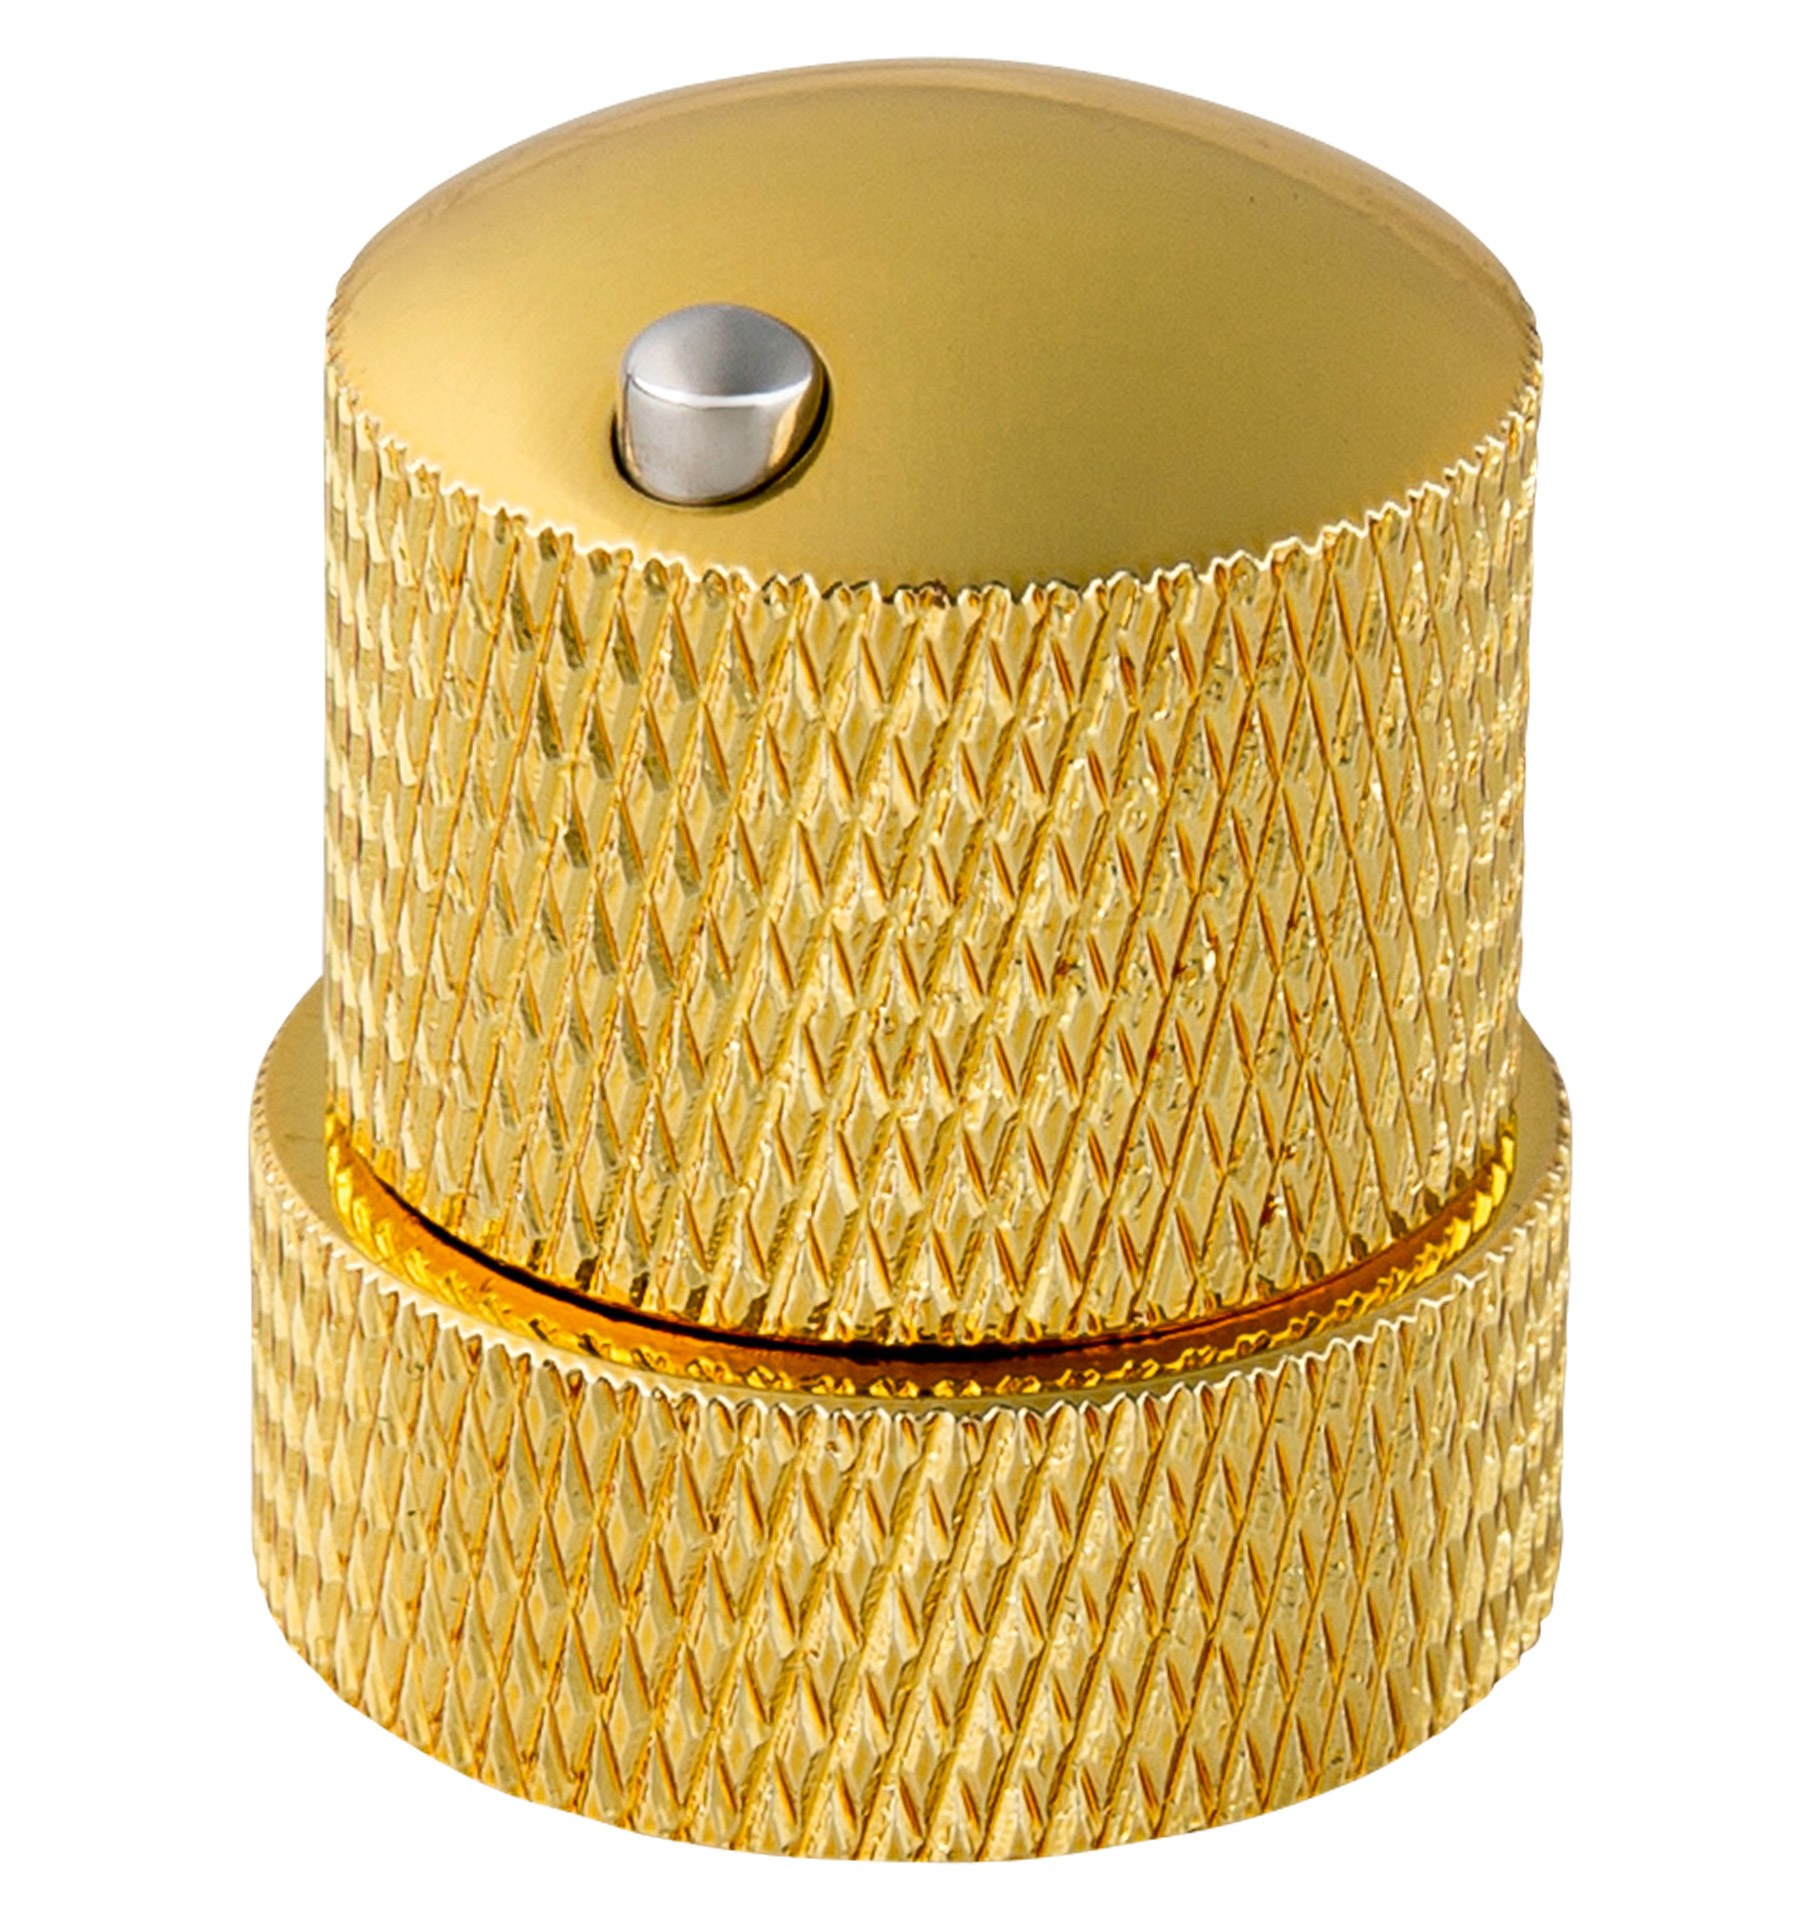 Framus & Warwick - Stacked Potentiometer Dome Knob with Convex Indicator - Gold